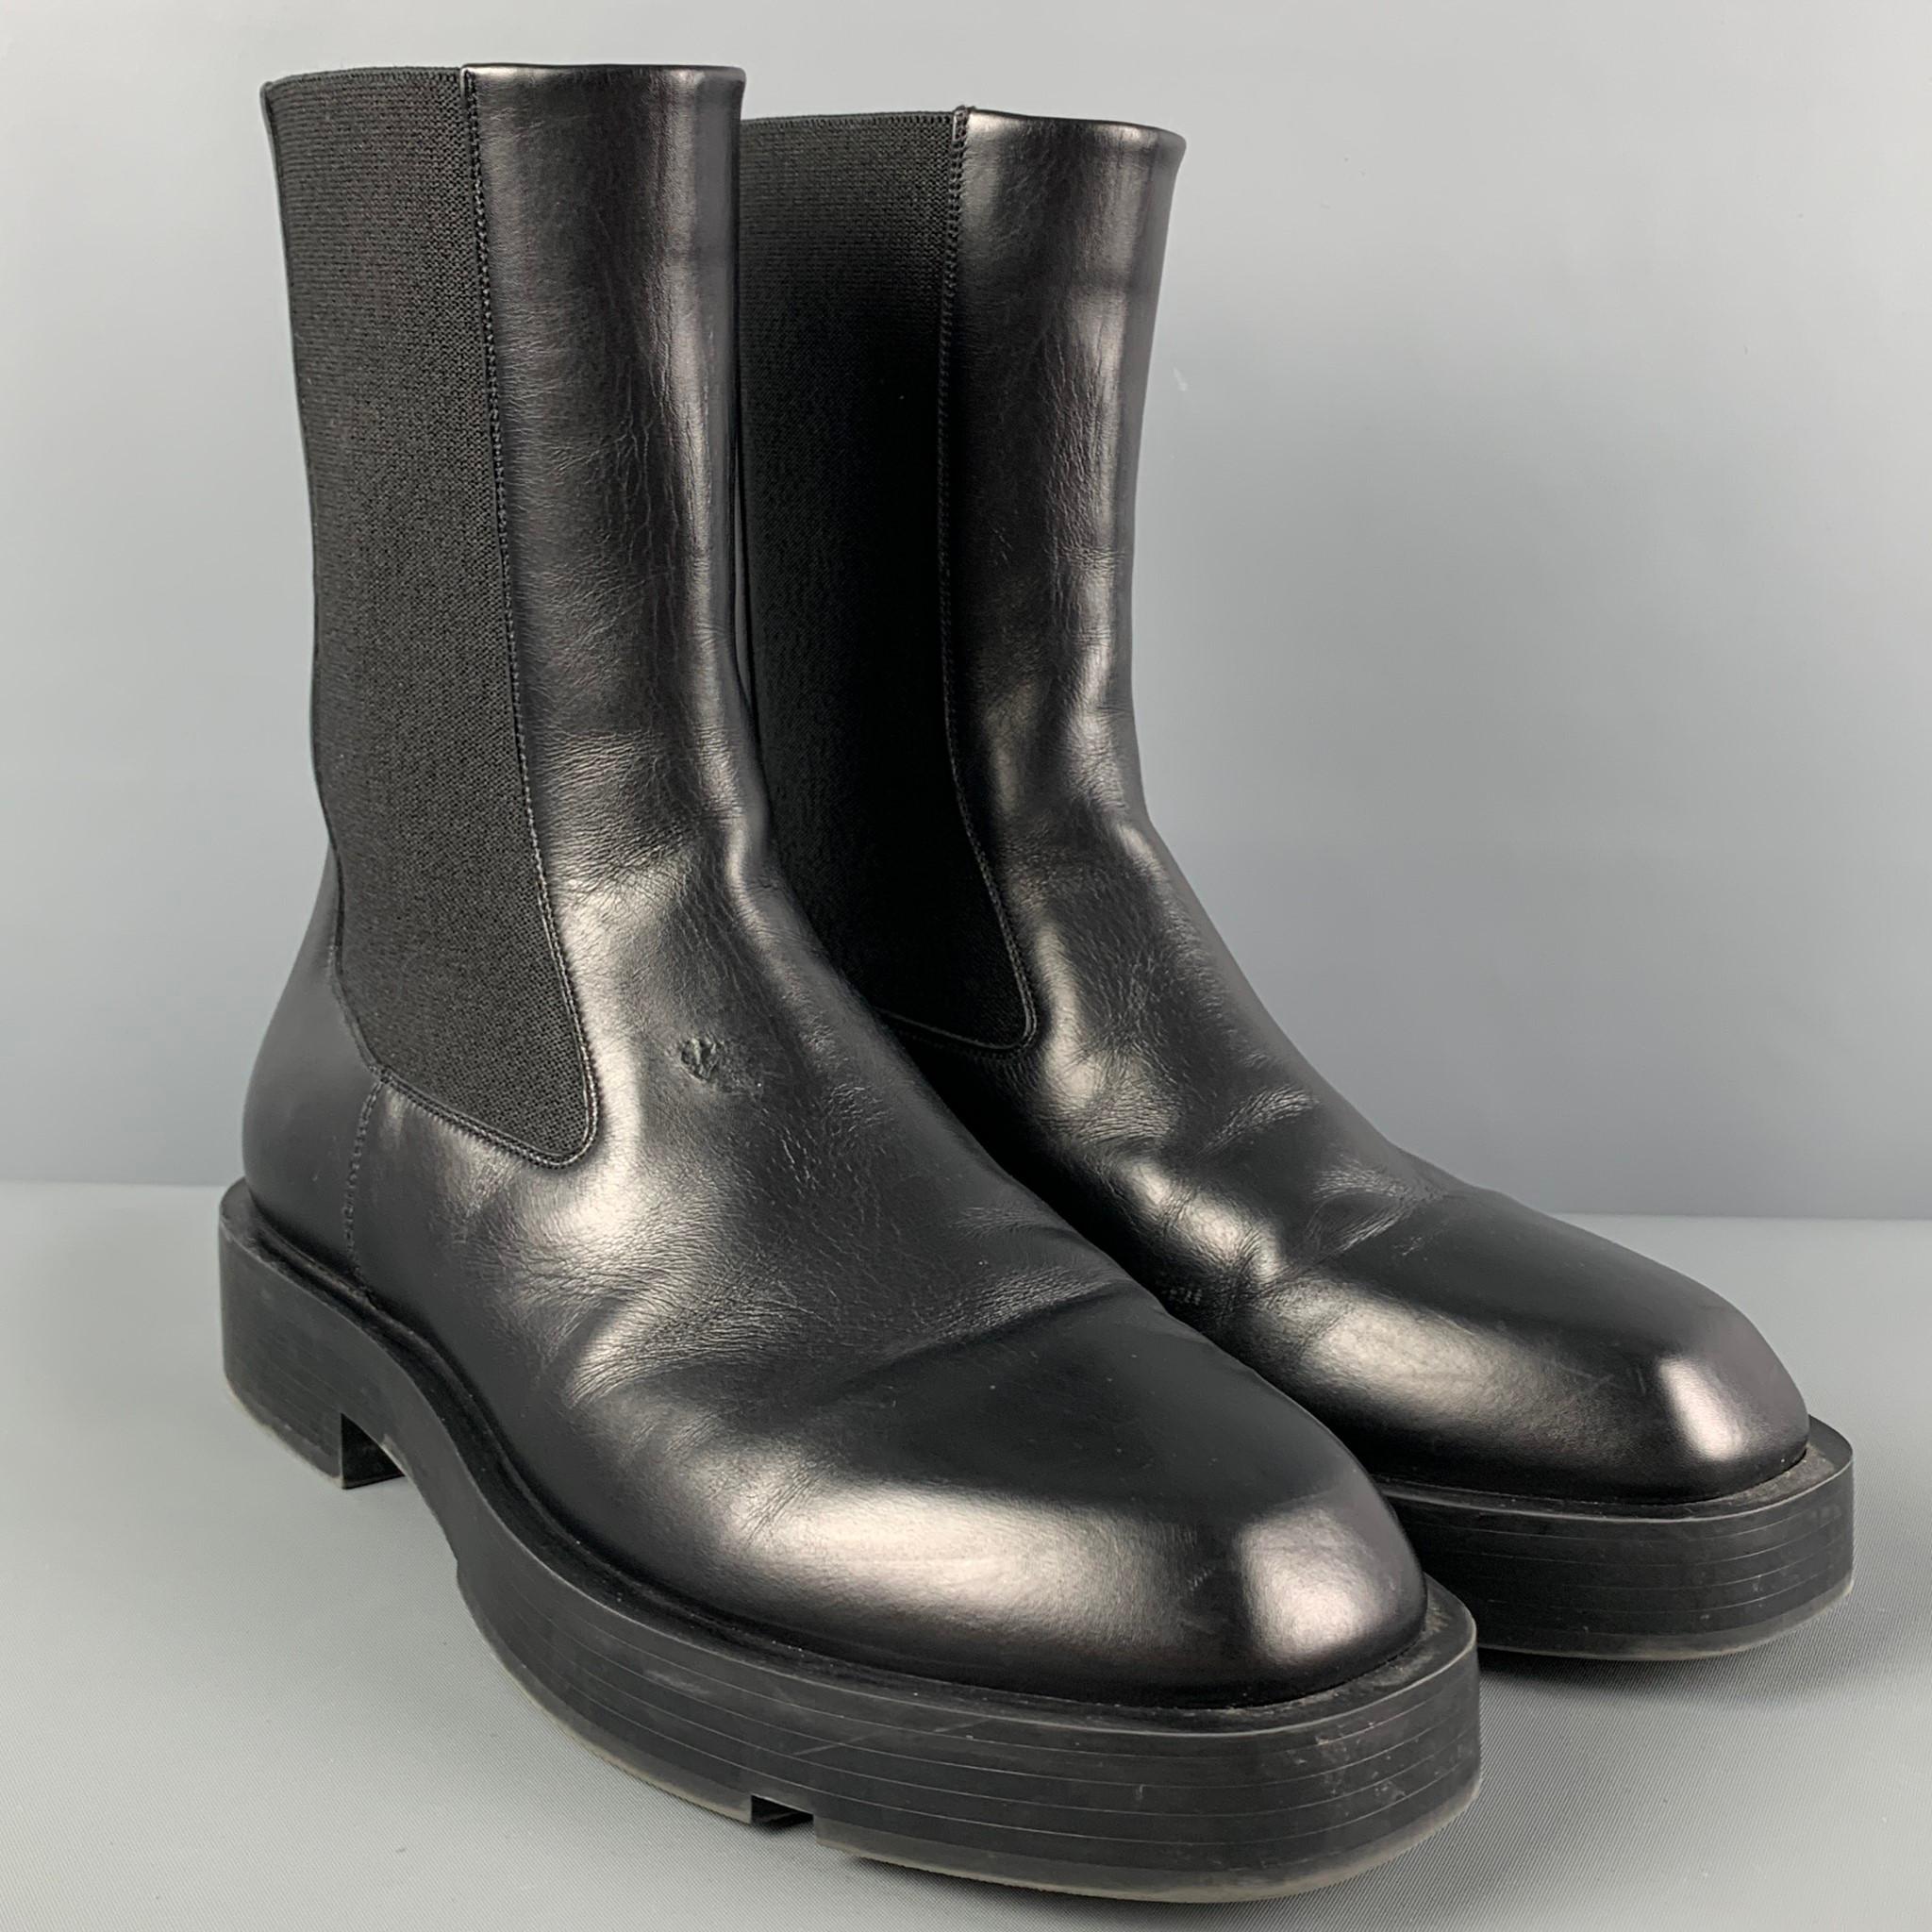 GIVENCHY boots comes in a black leather featuring a square toe, bacl metal plaque, and a chelsea style. Made in Italy. 

Very Good Pre-Owned Condition. Light wear. As-is.
Marked: SA 0231 41
Original Retail Price: $1,195.00

Measurements:

Length: